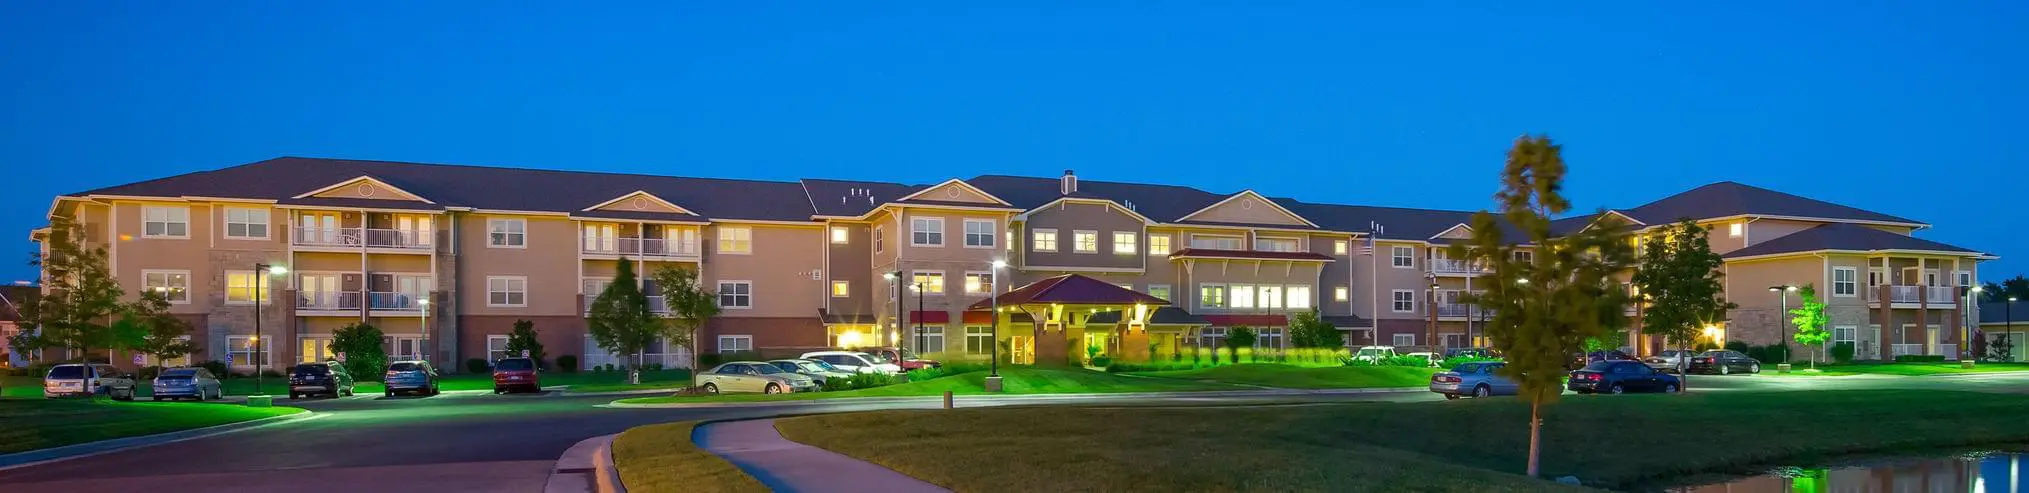 Photo of The Regent, Assisted Living, Nursing Home, Independent Living, CCRC, Wichita, KS 17